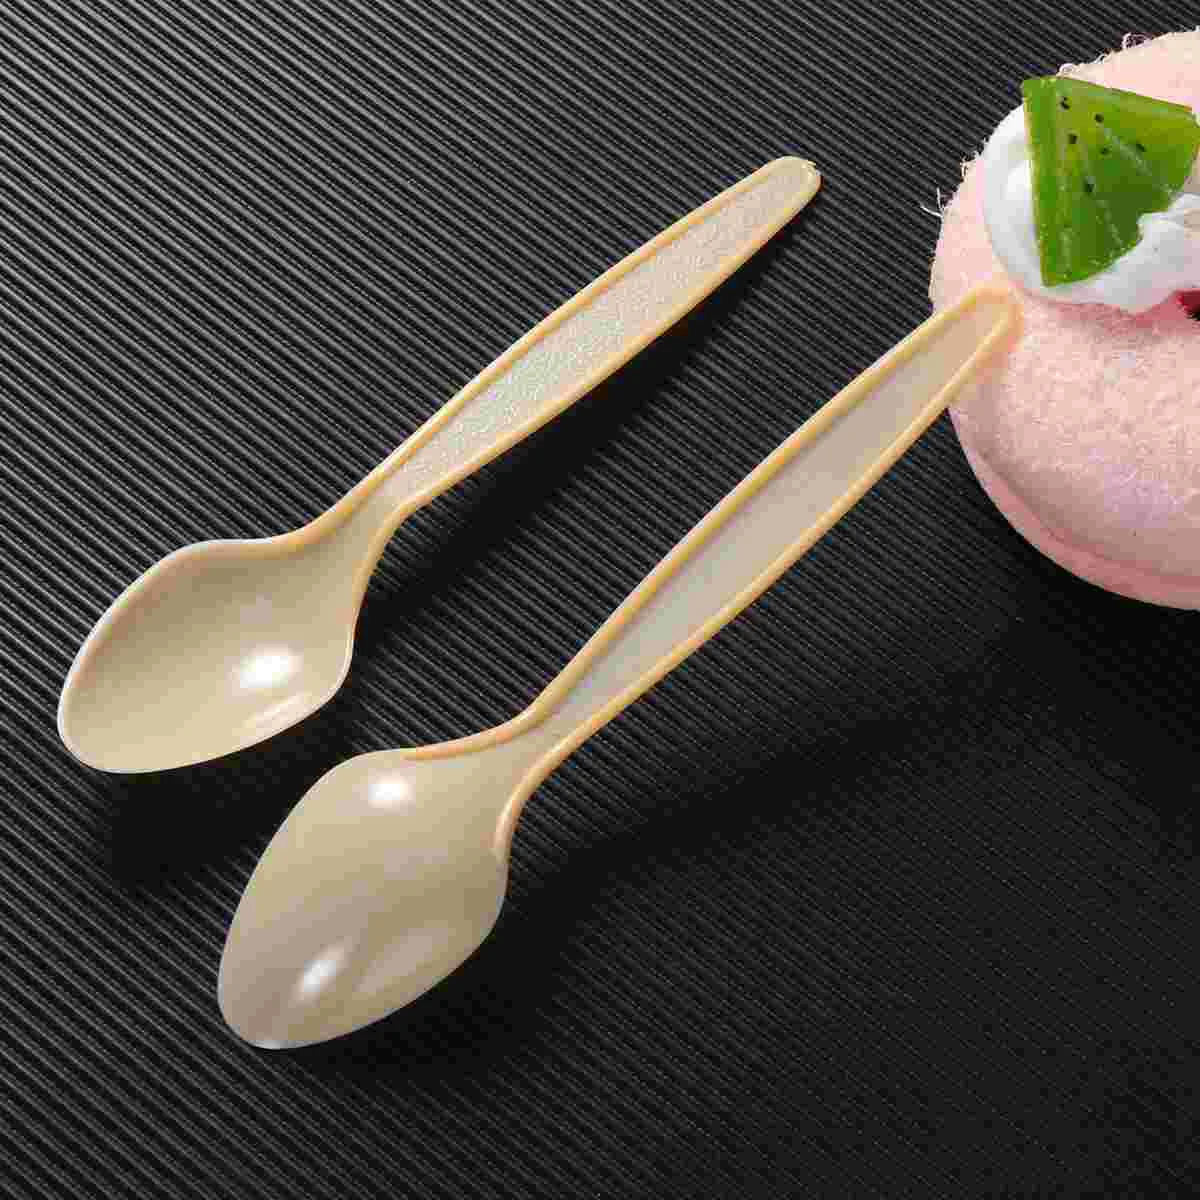 

Plastic Clear Spoons Utensils Look Mica Only Large Resistant Heat That Medium Like Wood Weight Heavyweight Flatware Inches